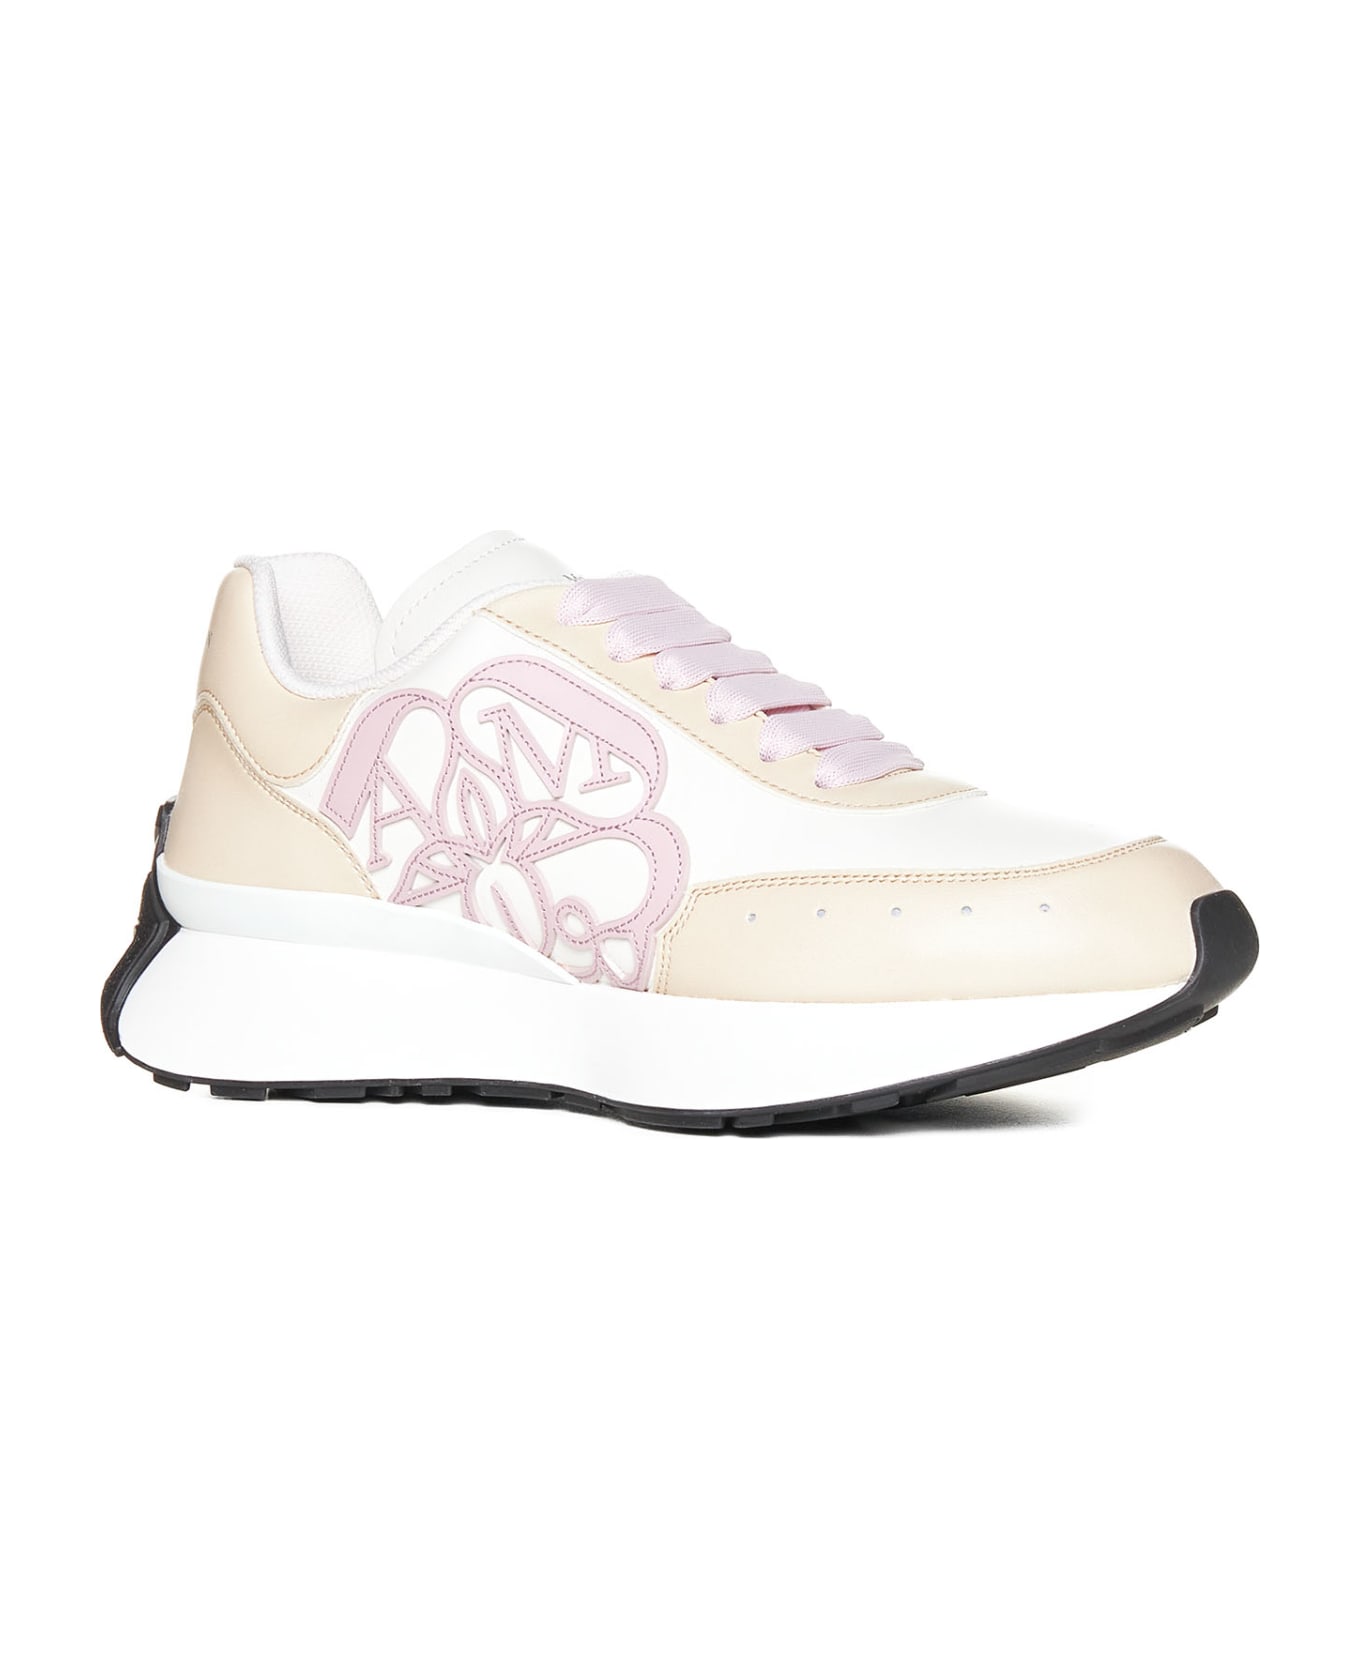 Alexander McQueen Sprint Runner Sneakers - Wh/ca./po./si/wh/blk